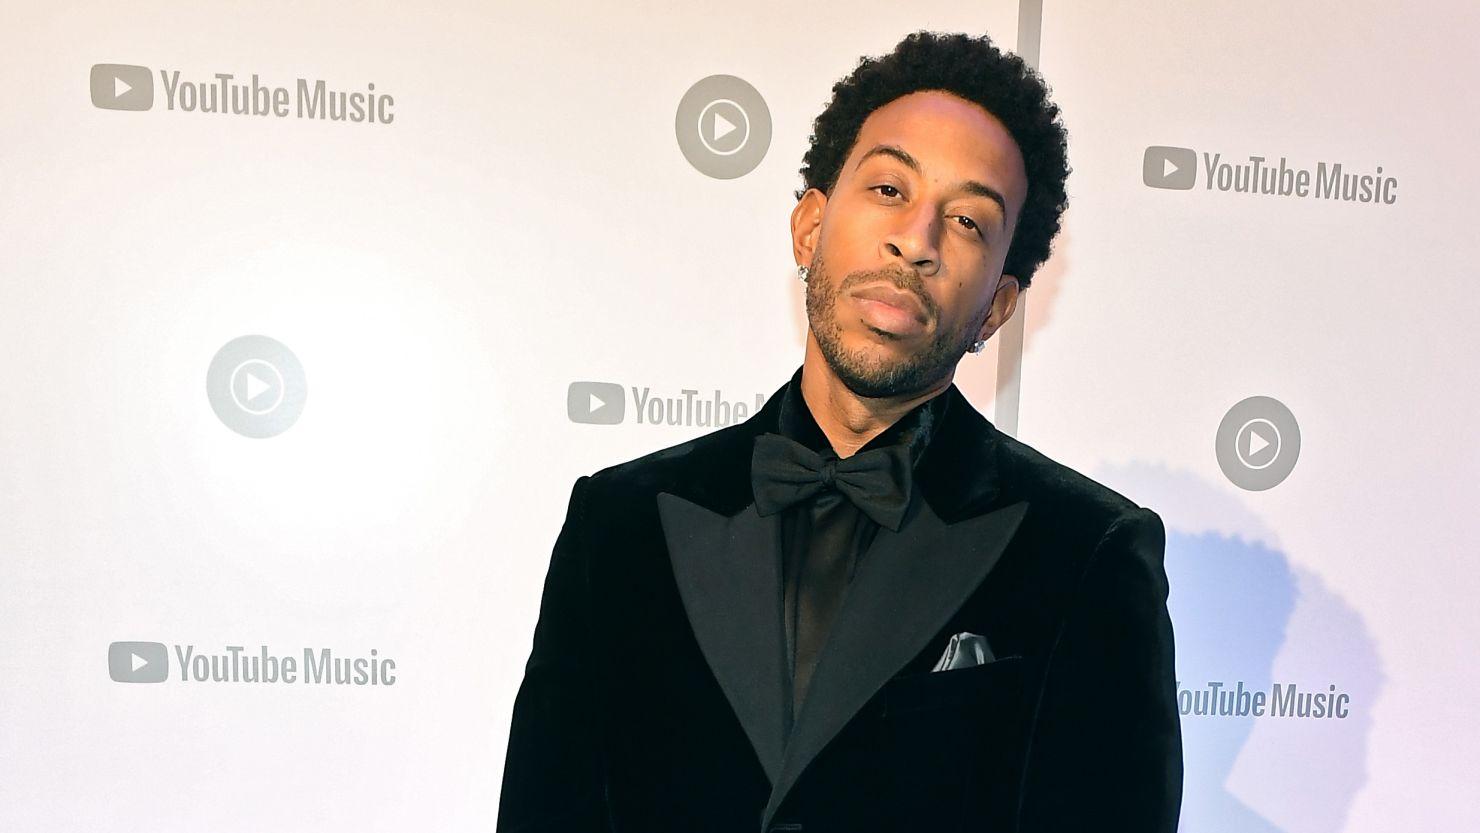 Ludacris is starting an educational platform for to teach kids about current events through music. (Photo by Paras Griffin/Getty Images for YouTube Music)